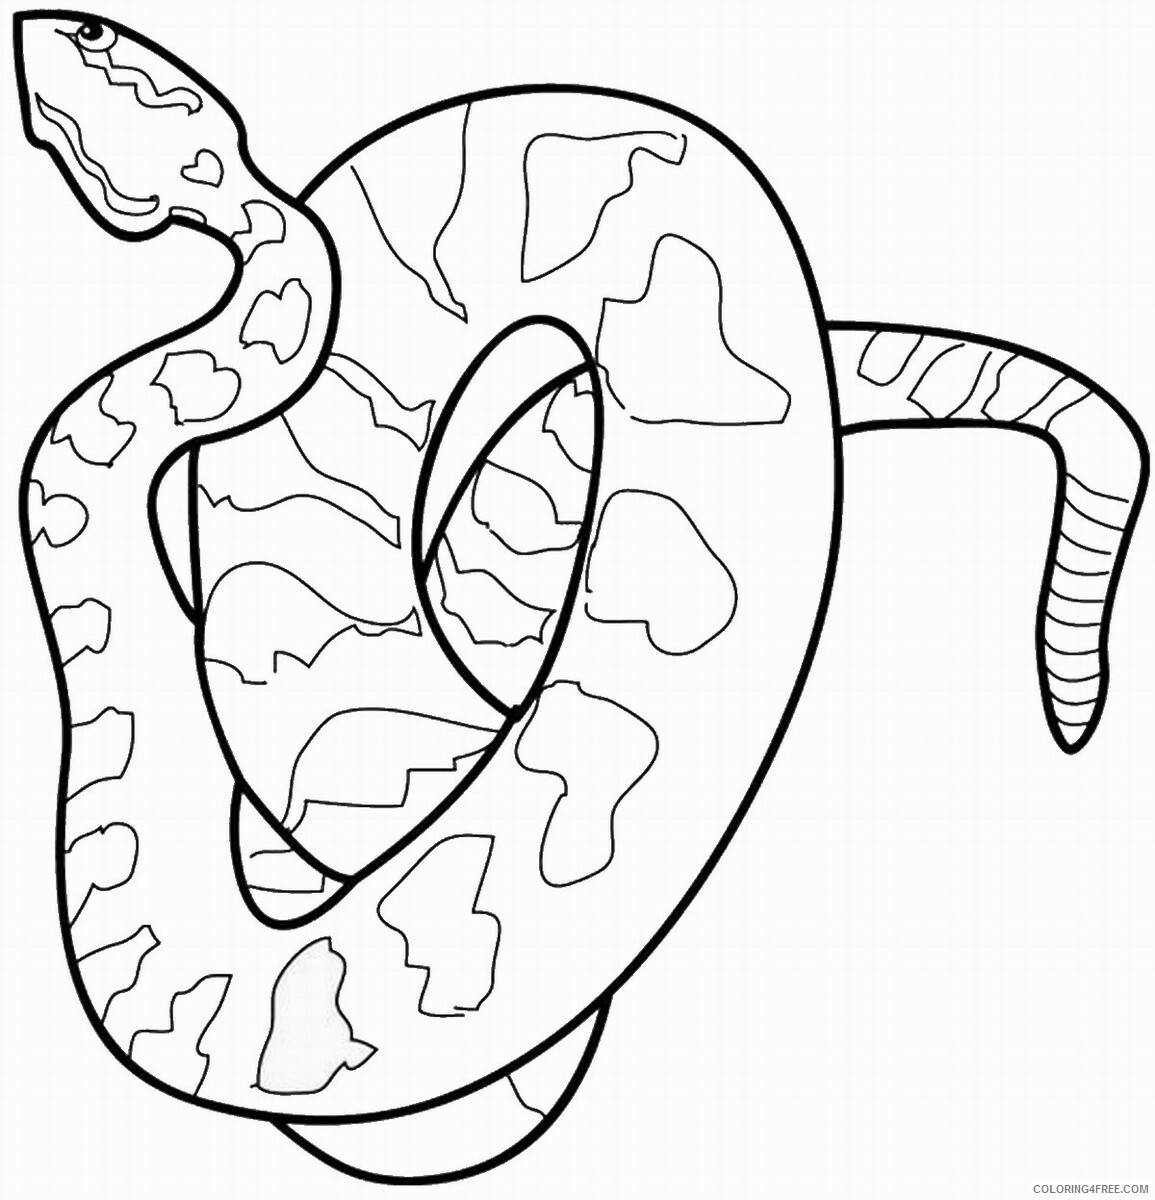 Snake Coloring Pages Animal Printable Sheets snake_cl_15 2021 4557 Coloring4free